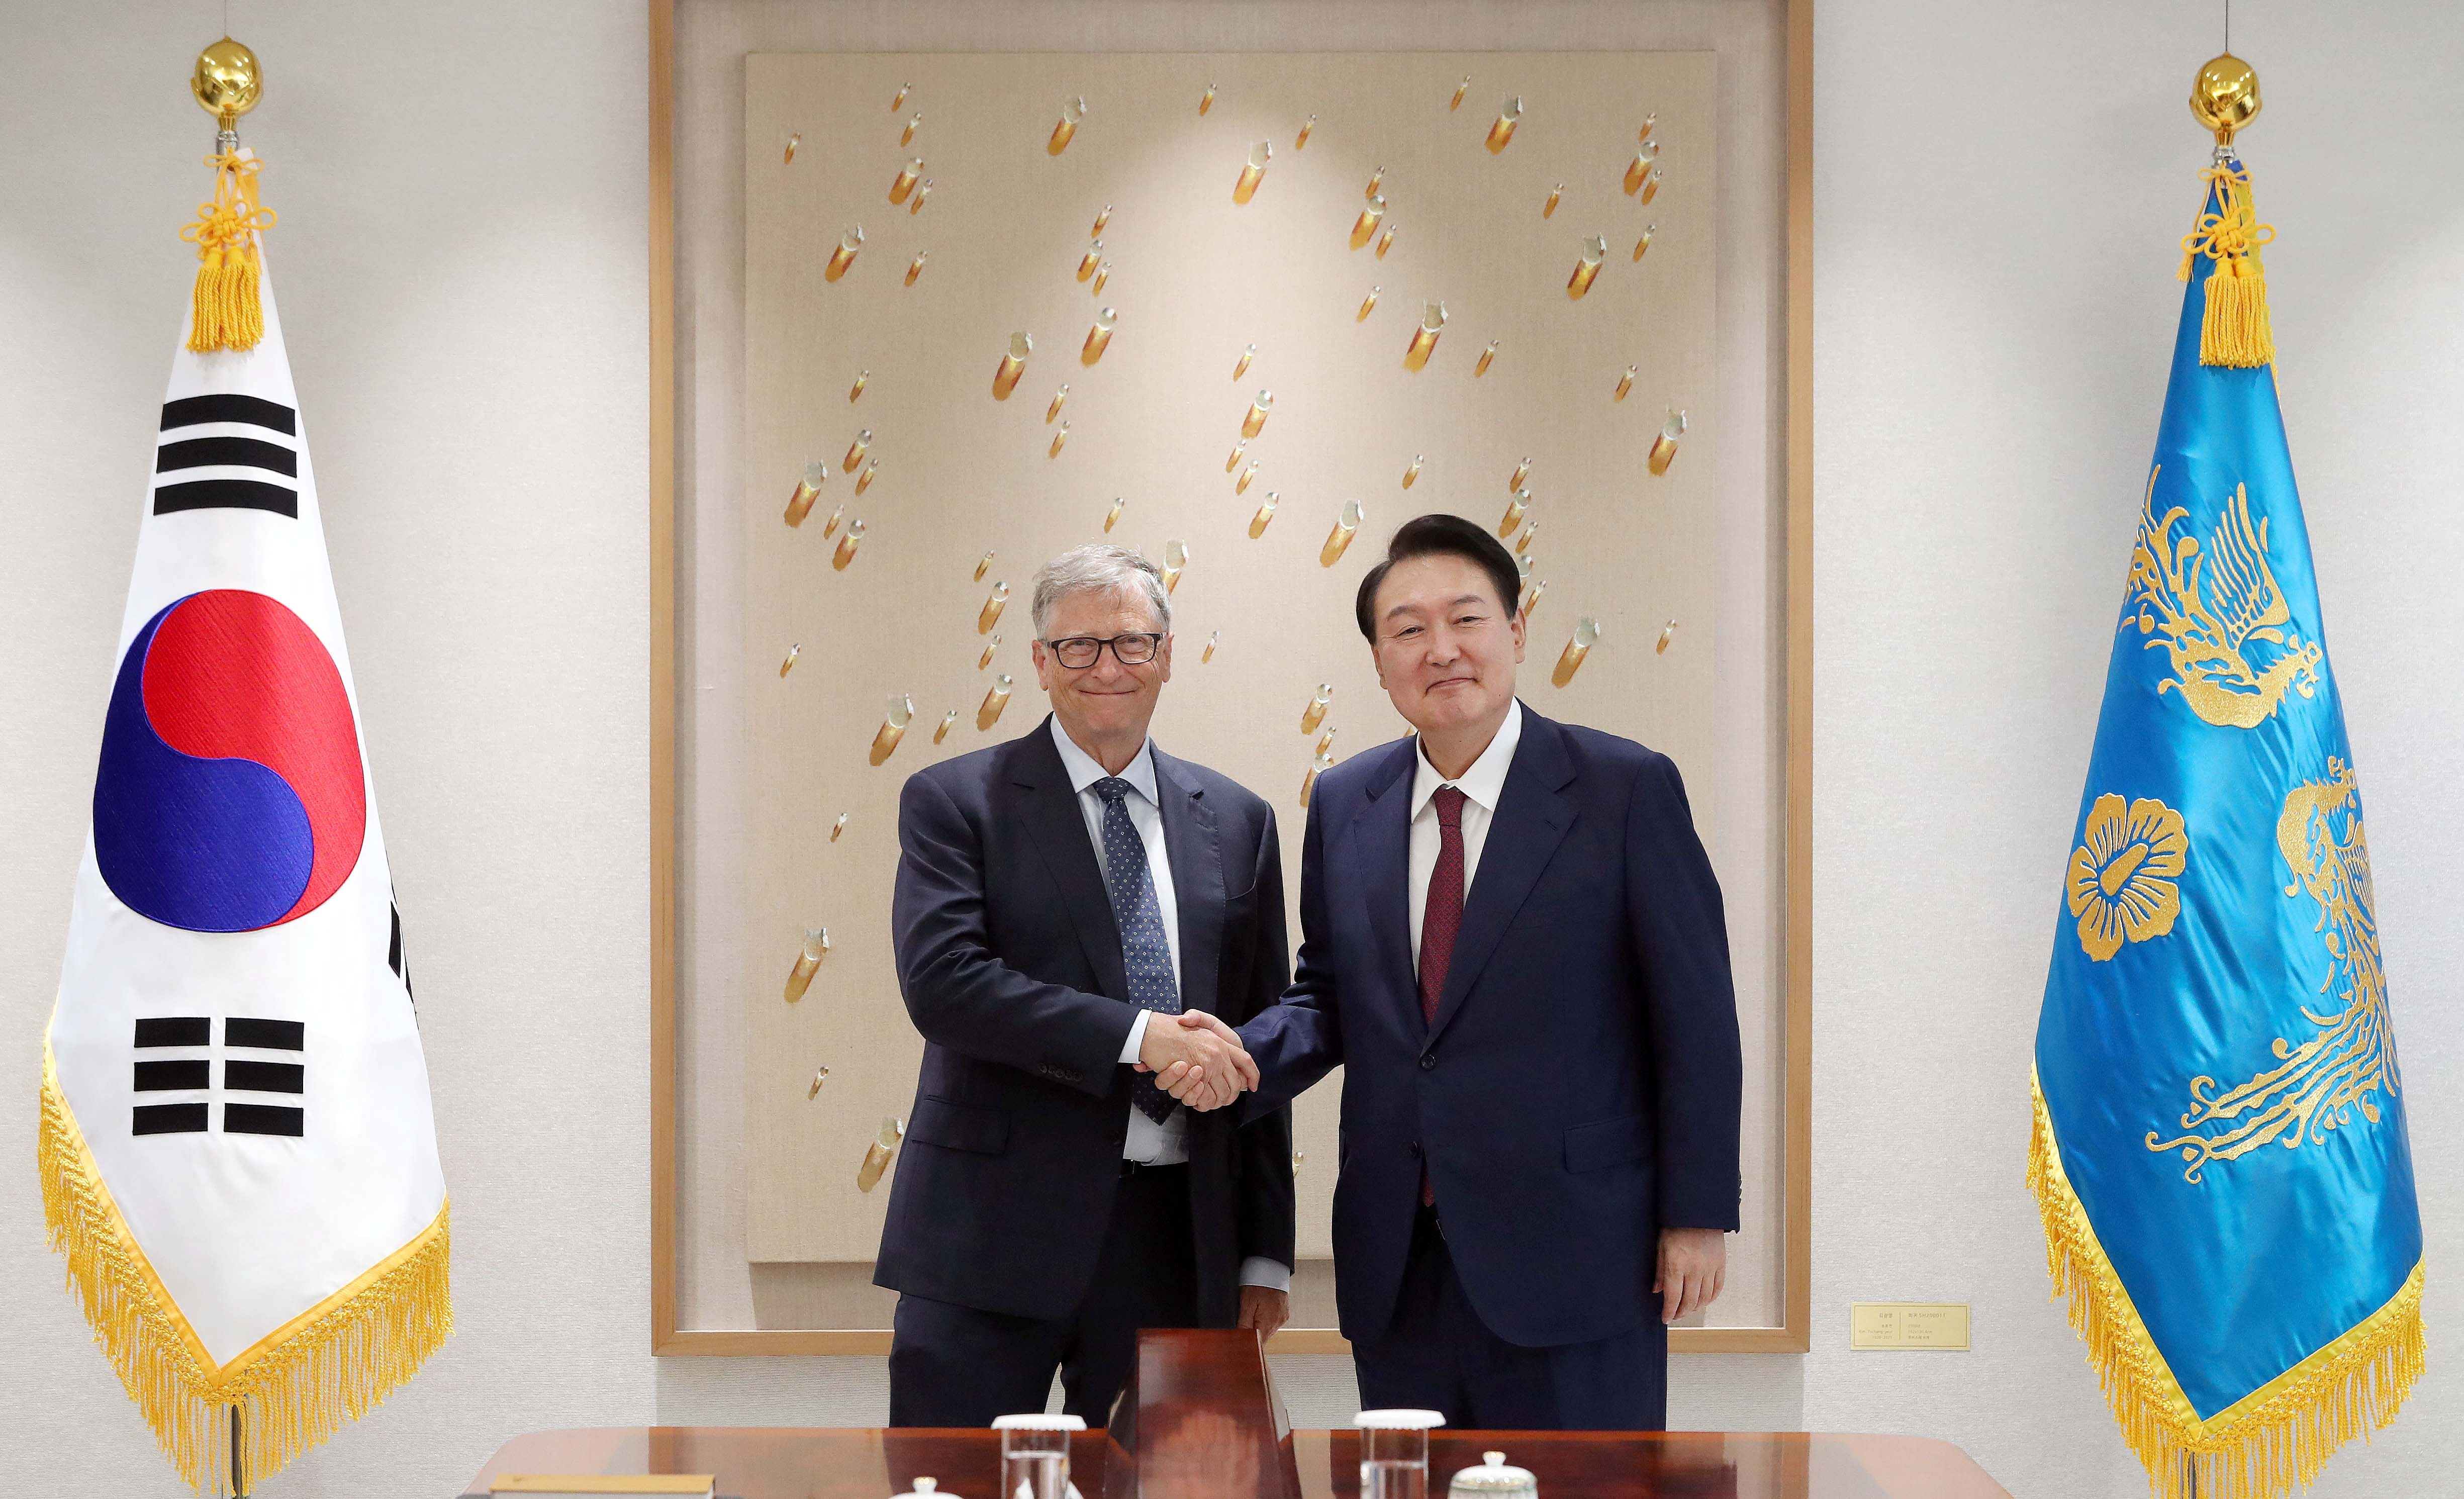 Microsoft Corp co-founder Bill Gates meets with South Korean President Yoon Suk-yeol in Seoul